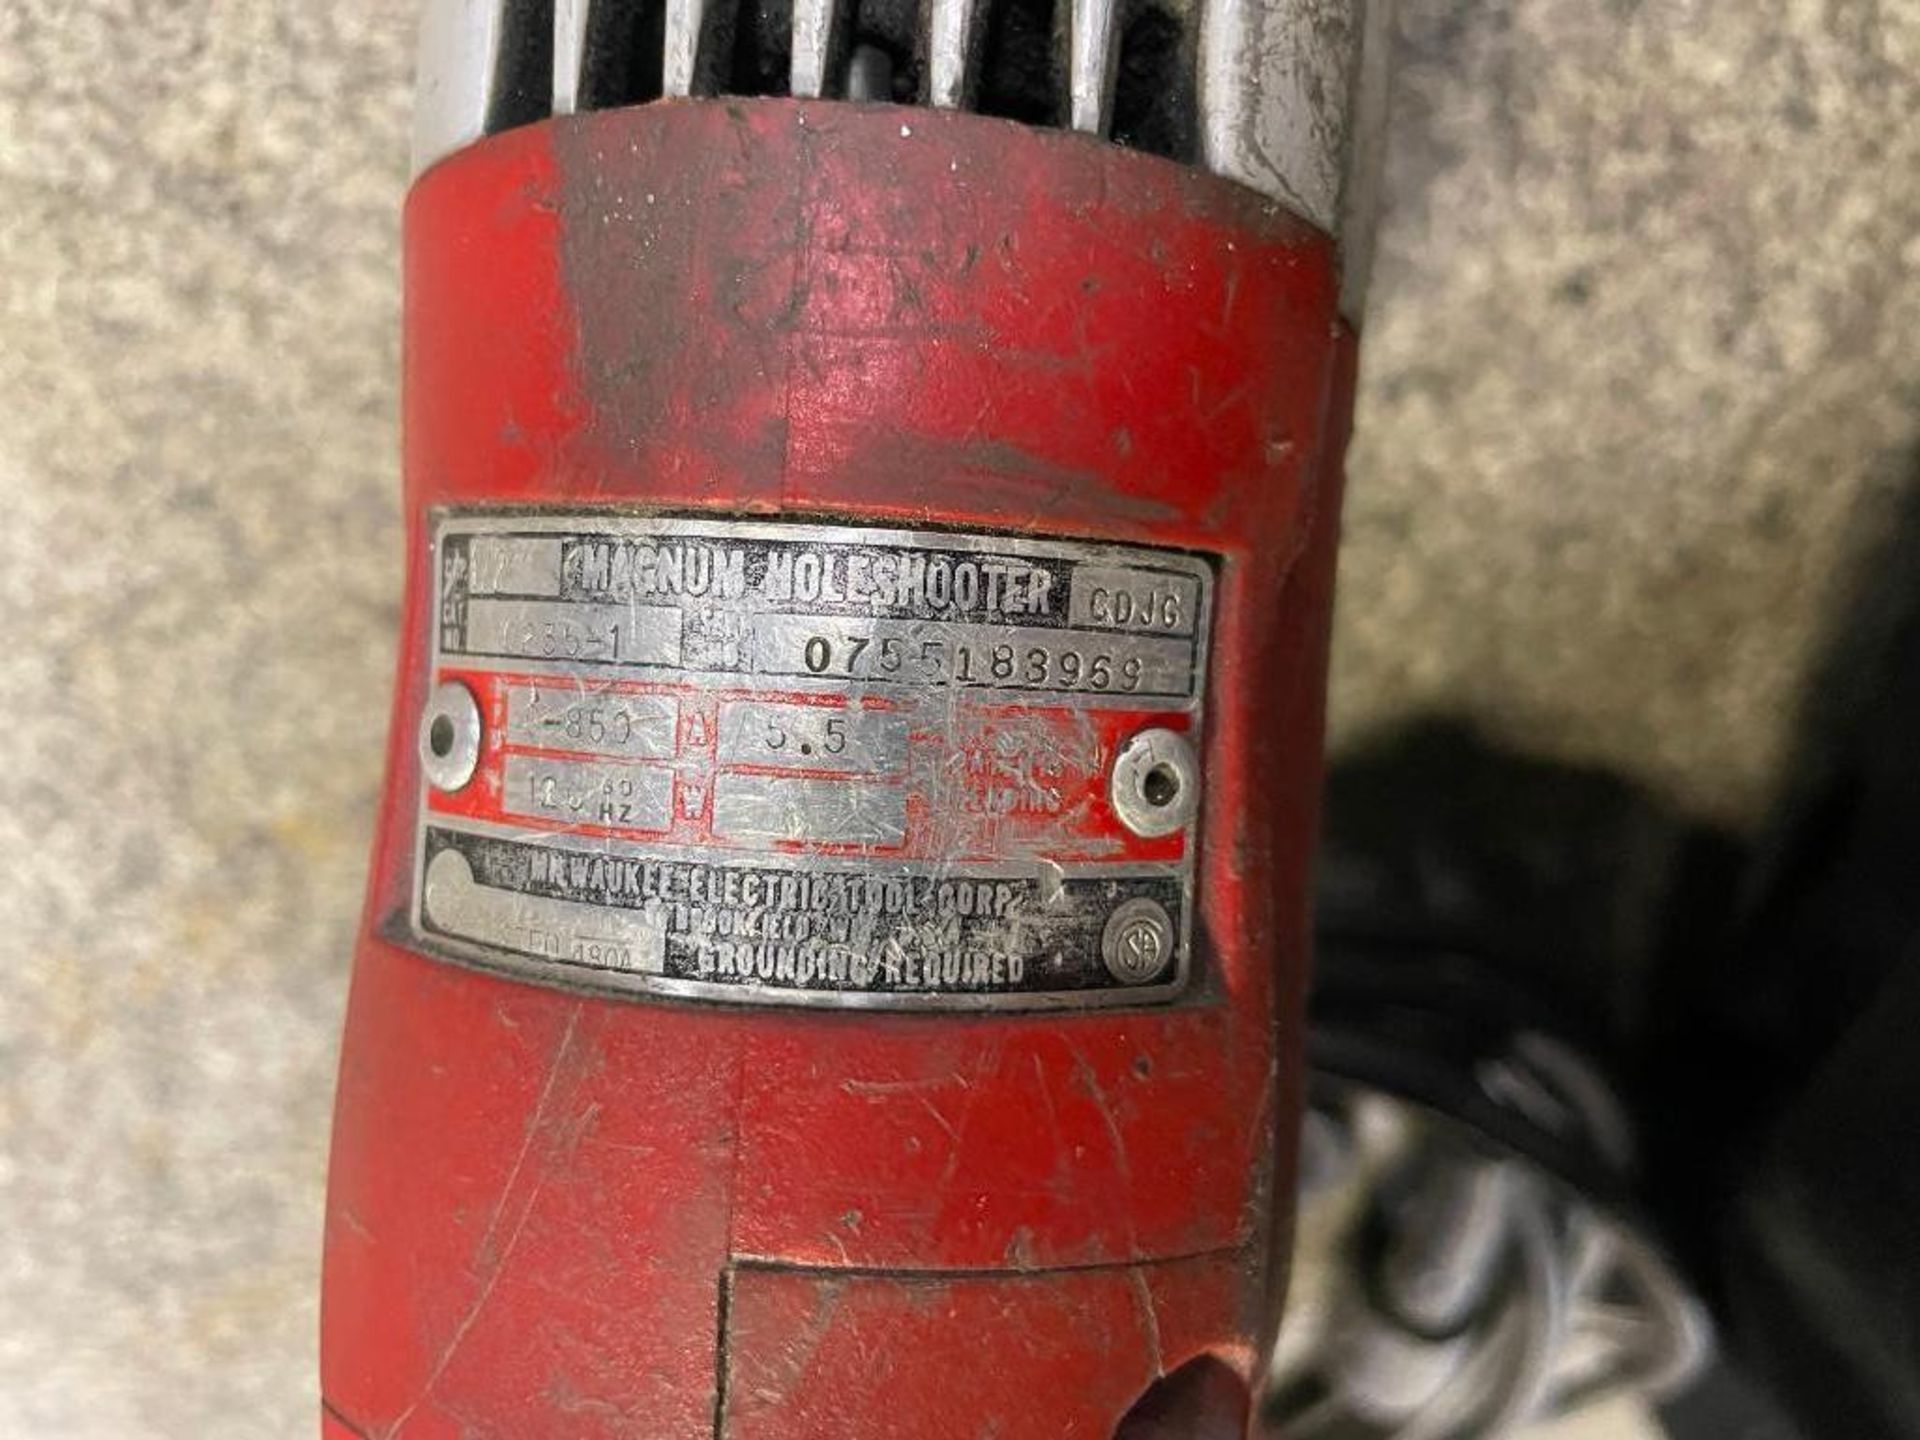 MILWAUKEE 1/2" CORDED MAGNUM DRILL BRAND/MODEL: 0235-1 LOCATION: WAREHOUSE QTY: 1 - Image 3 of 3